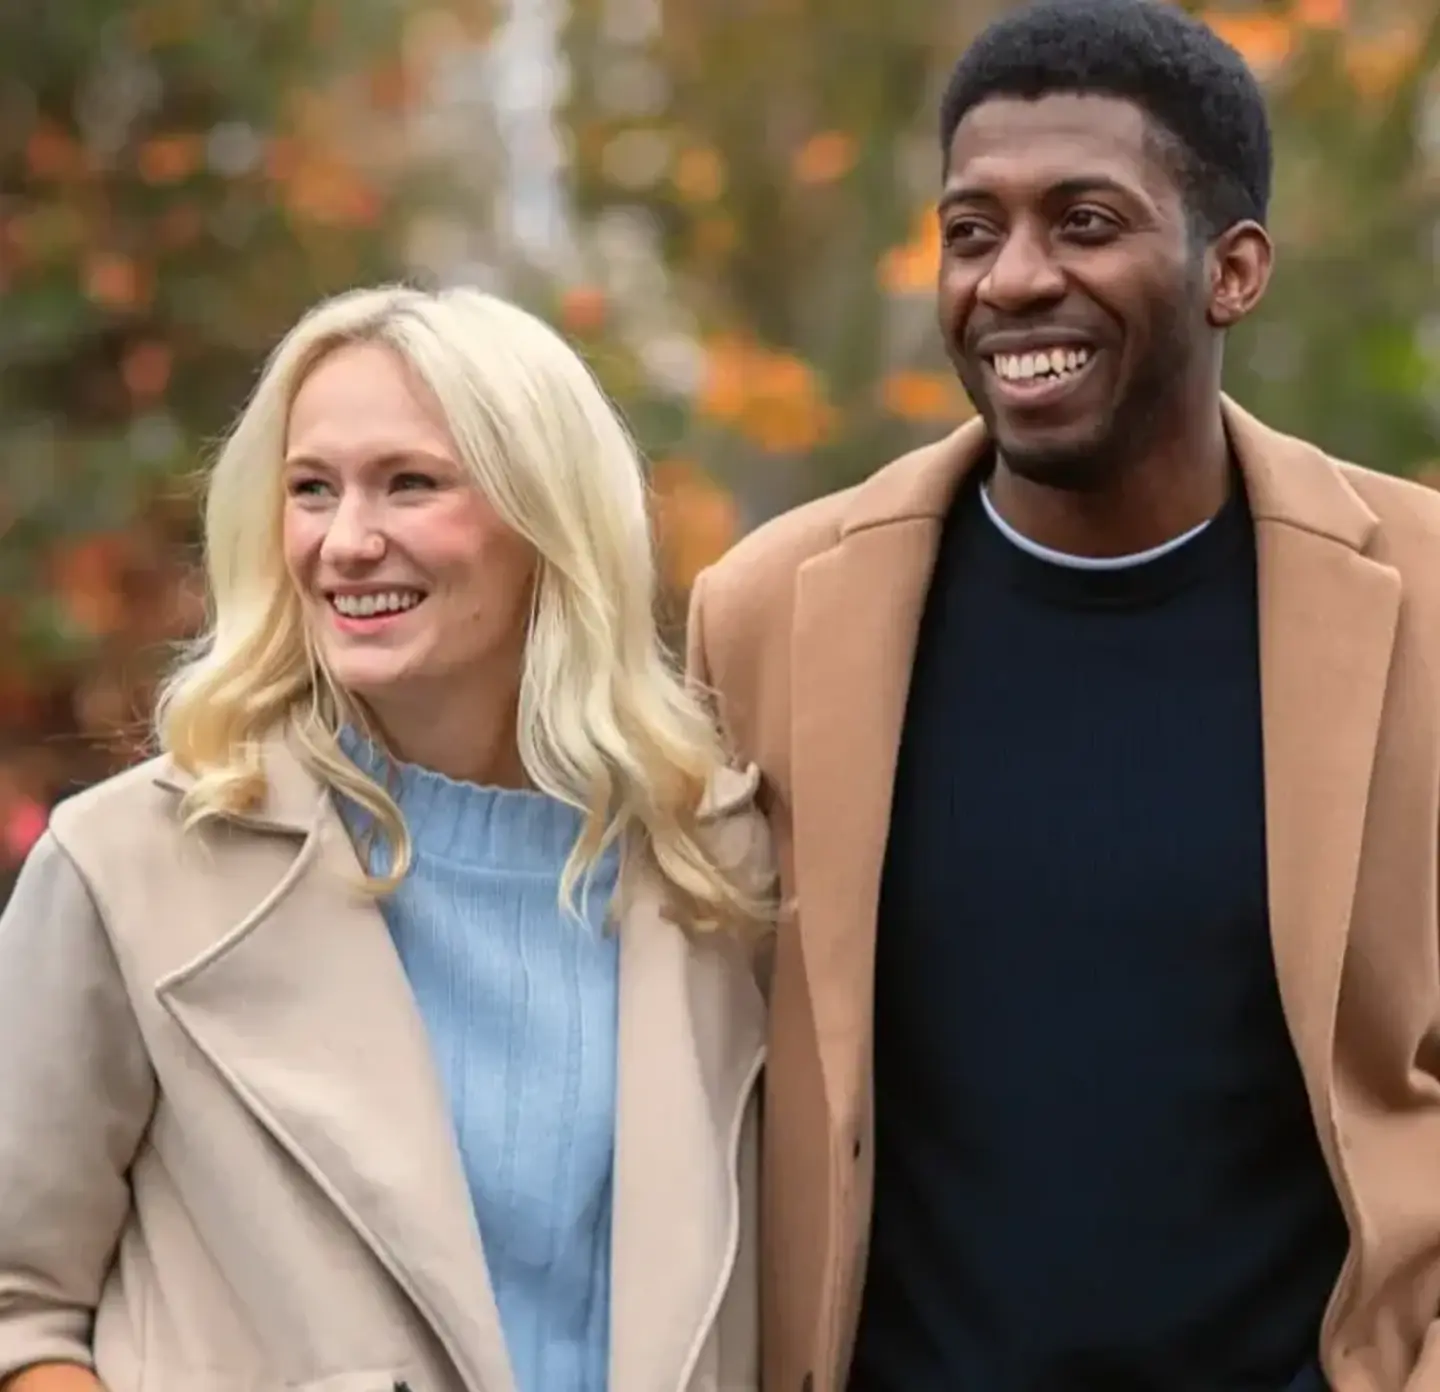 A couple with an arm around each other facing forward, looking away from the camera. Both are smiling and wearing brown coats, with a backdrop of autumnal leaves. Blurred in the background is the front of a red car.